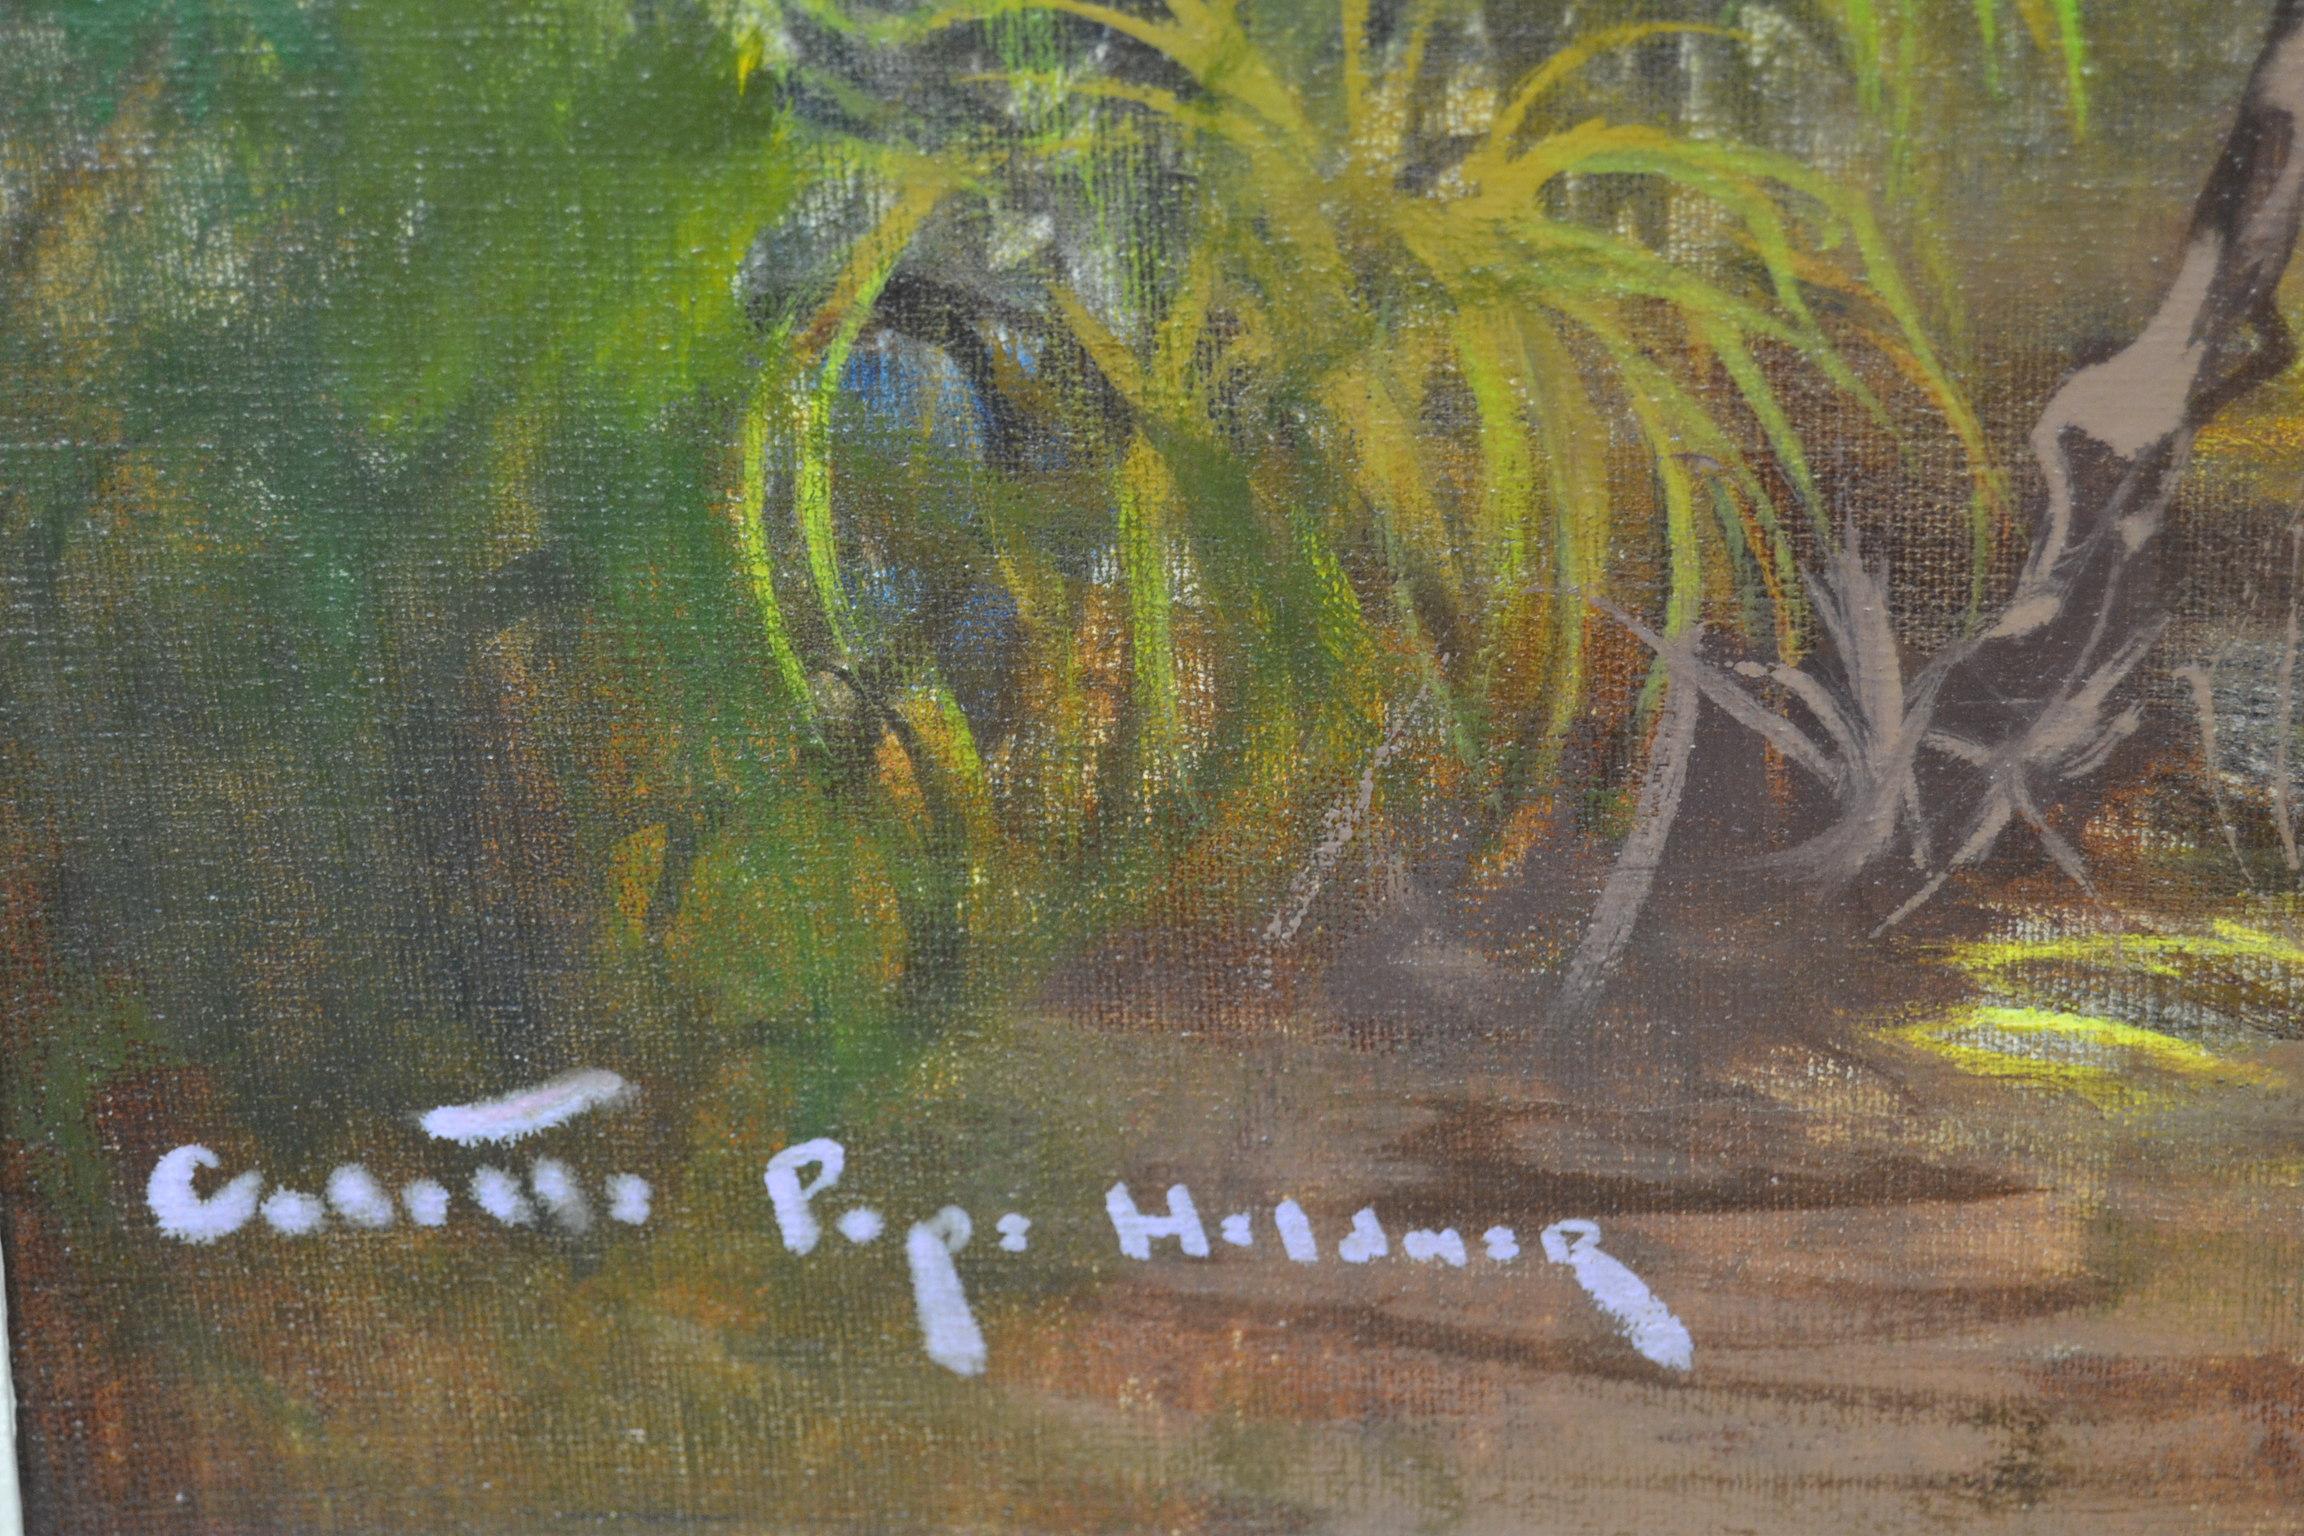 Colette Pope Heldner, Signed Oil on Canvas Painting, Swamp Idyll 2